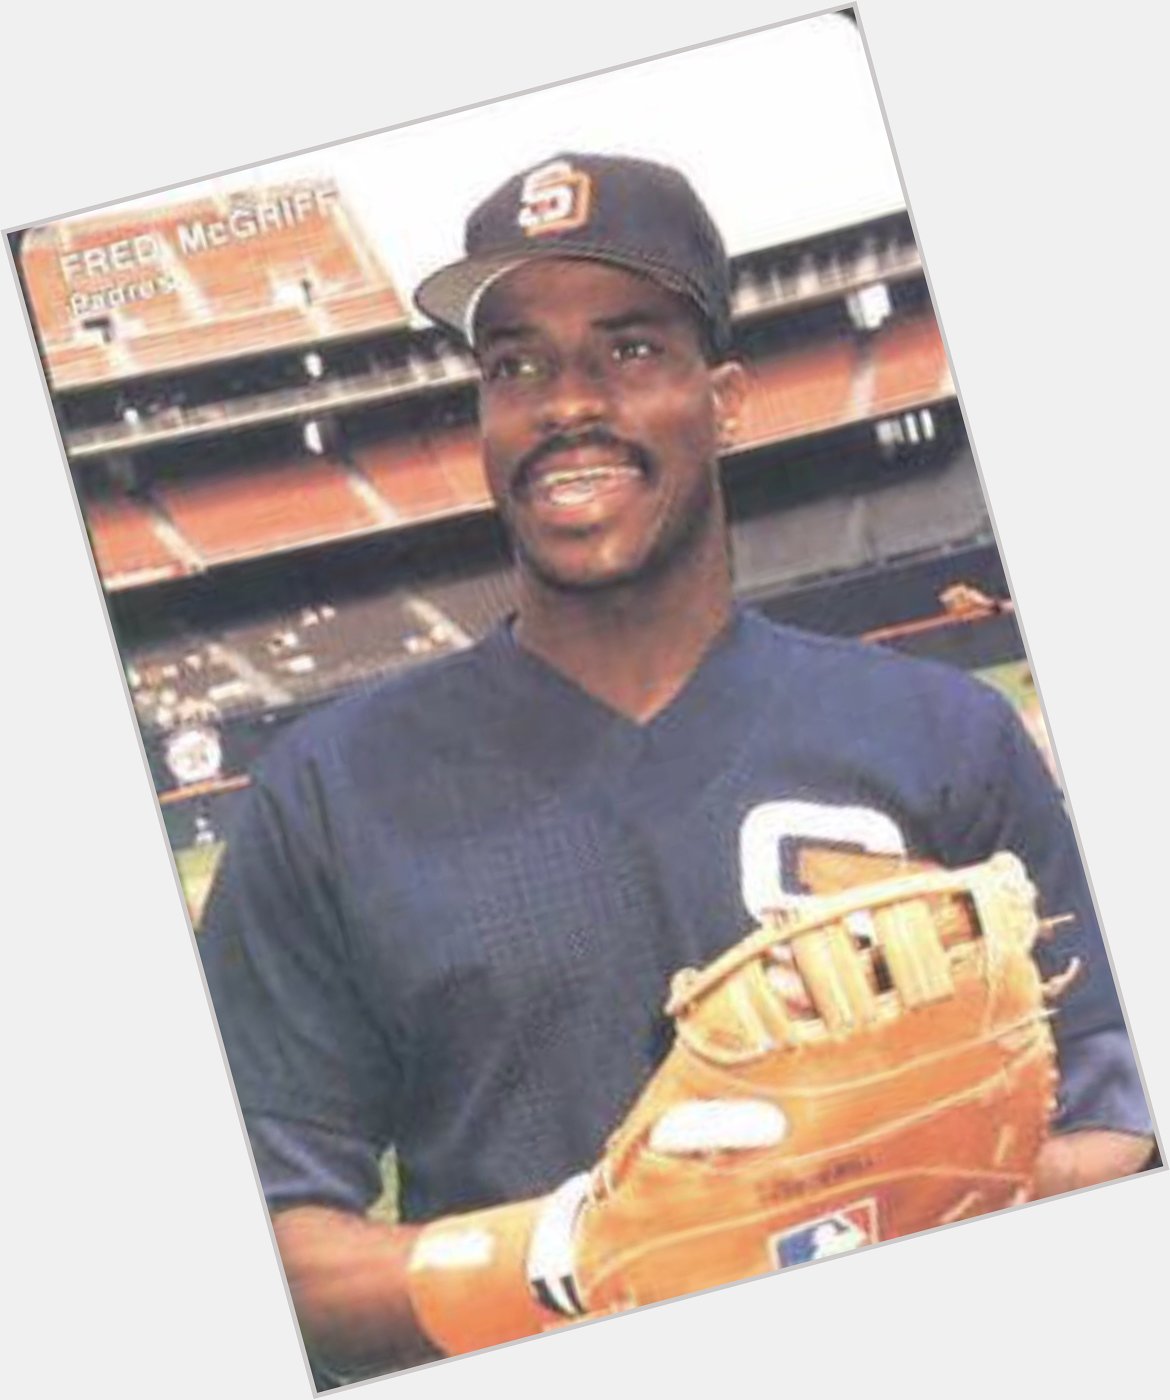 A Happy Birthday to former 1B Fred McGriff 